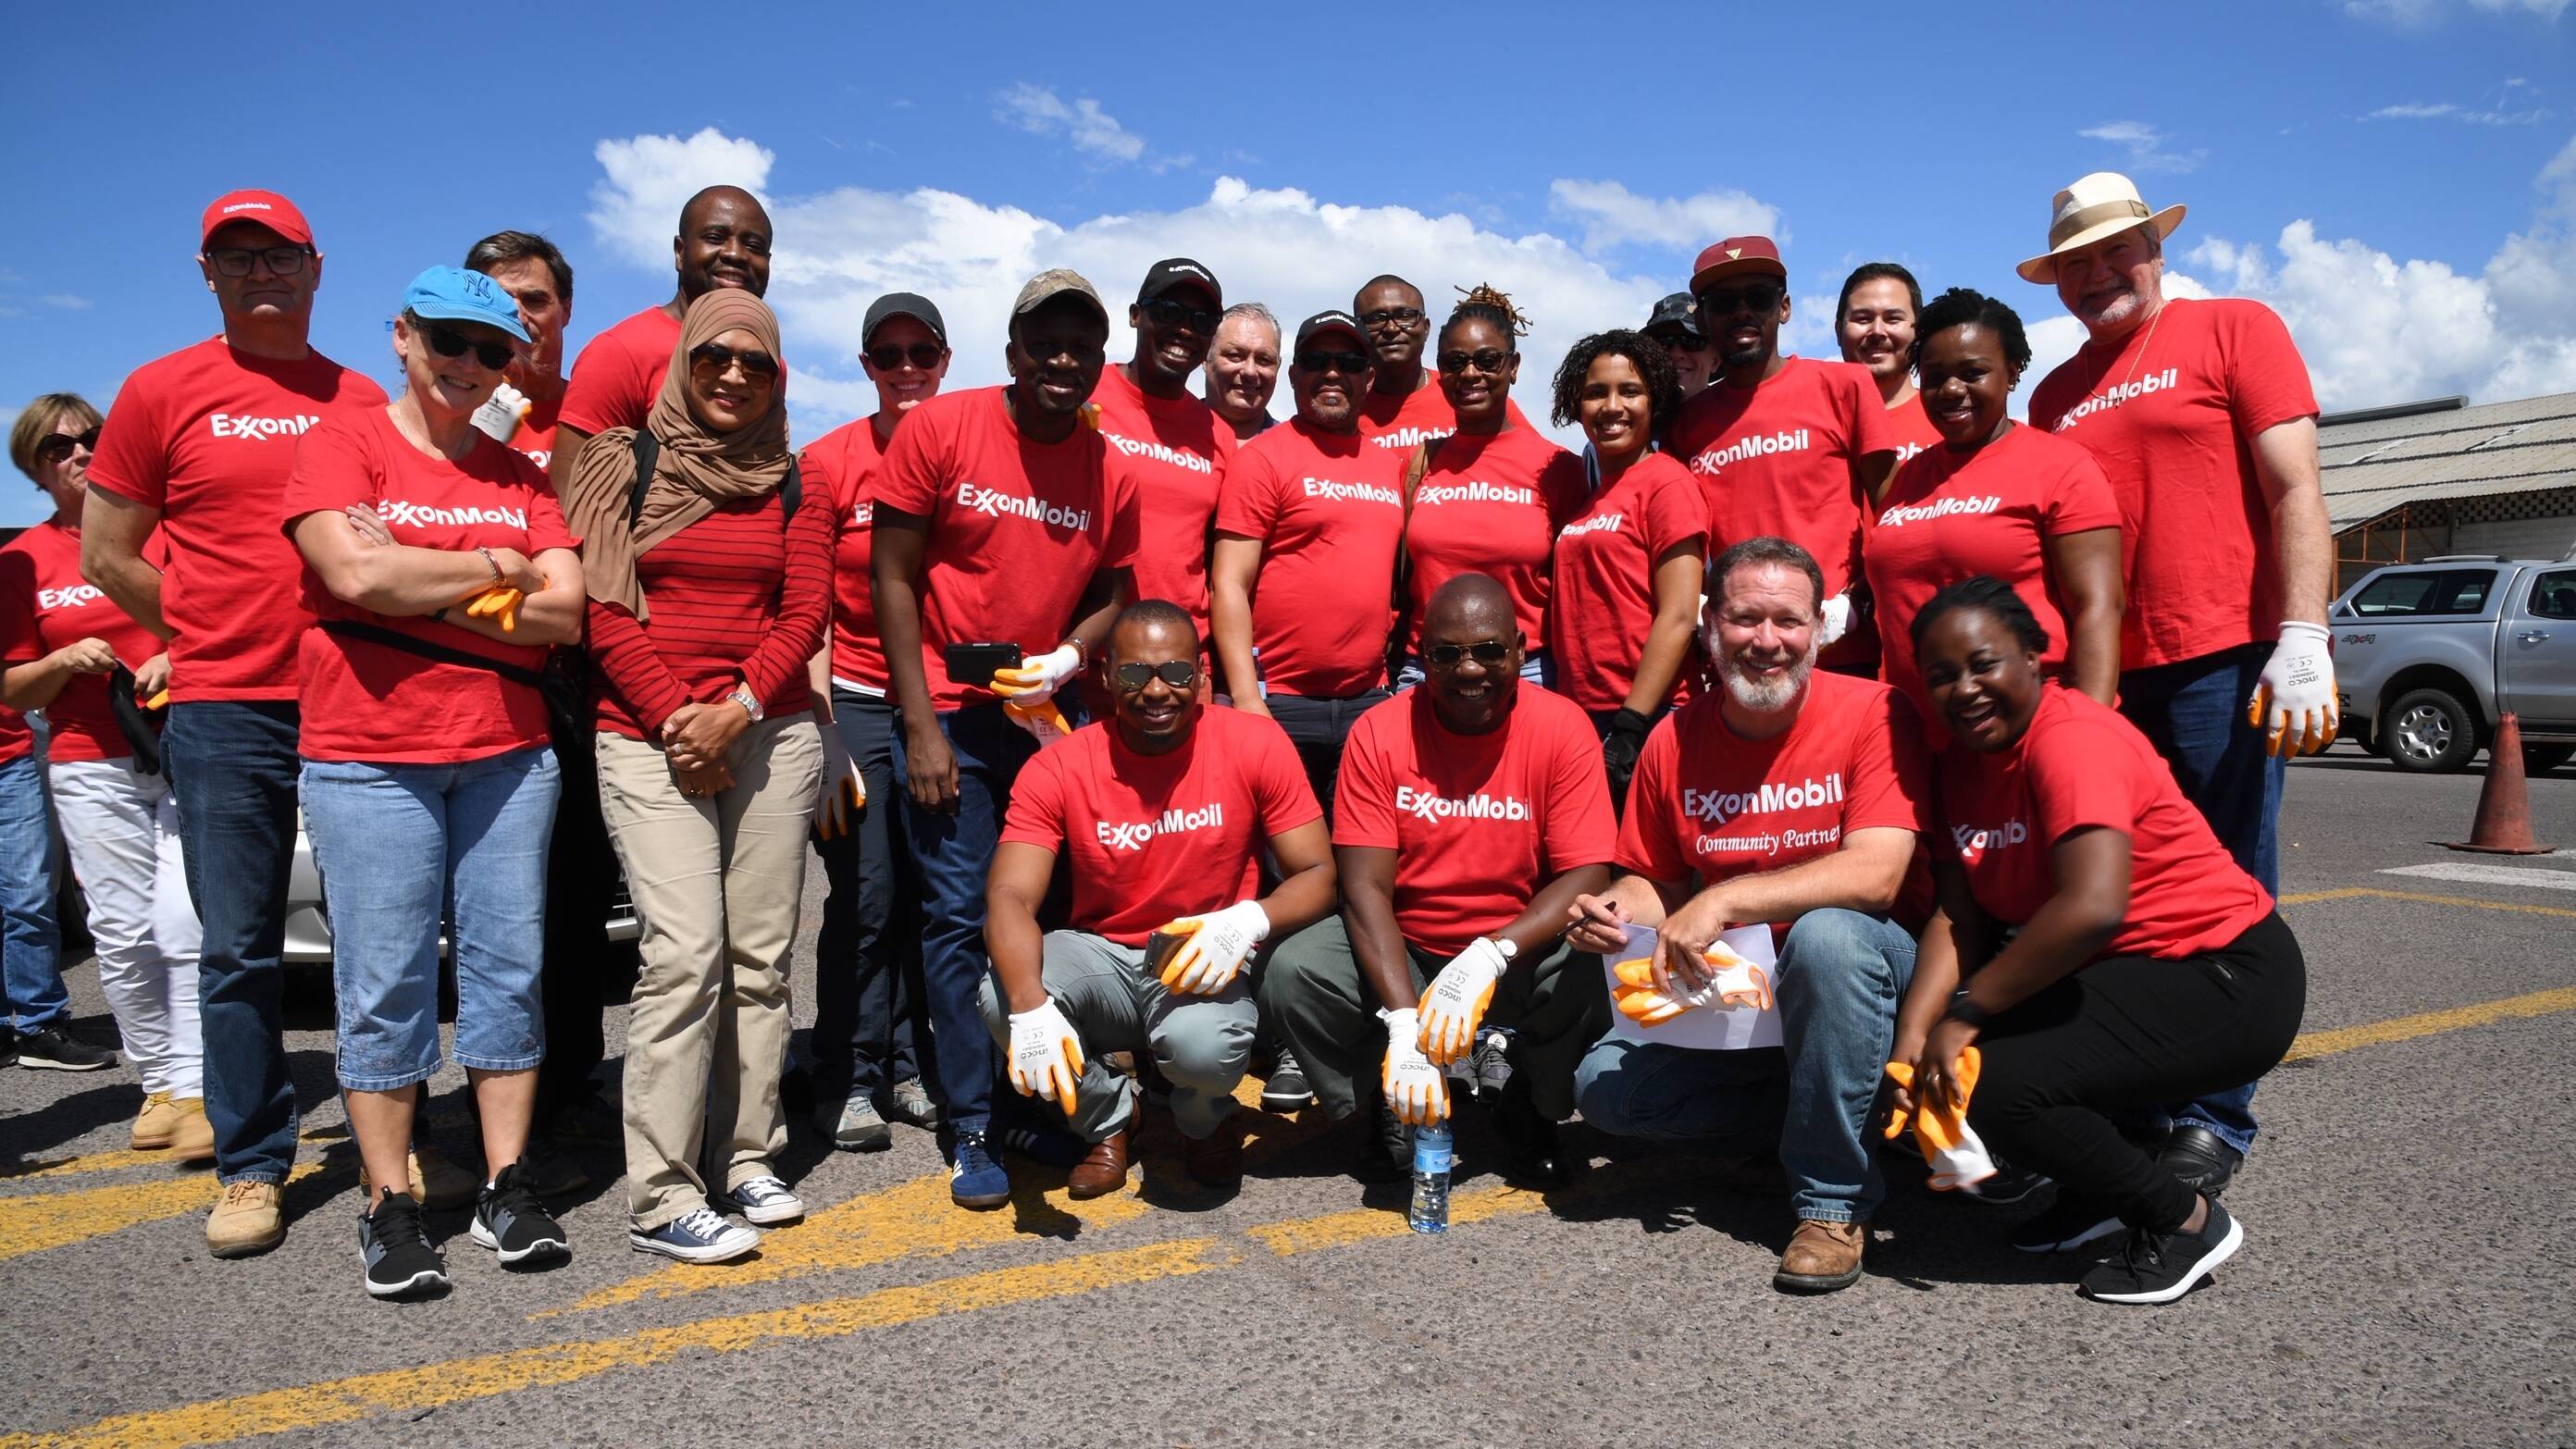 ‎A group of ExxonMobil Mozambique employees volunteered more than 100 hours to assist in relief efforts in the days immediately following Cyclone Idai.